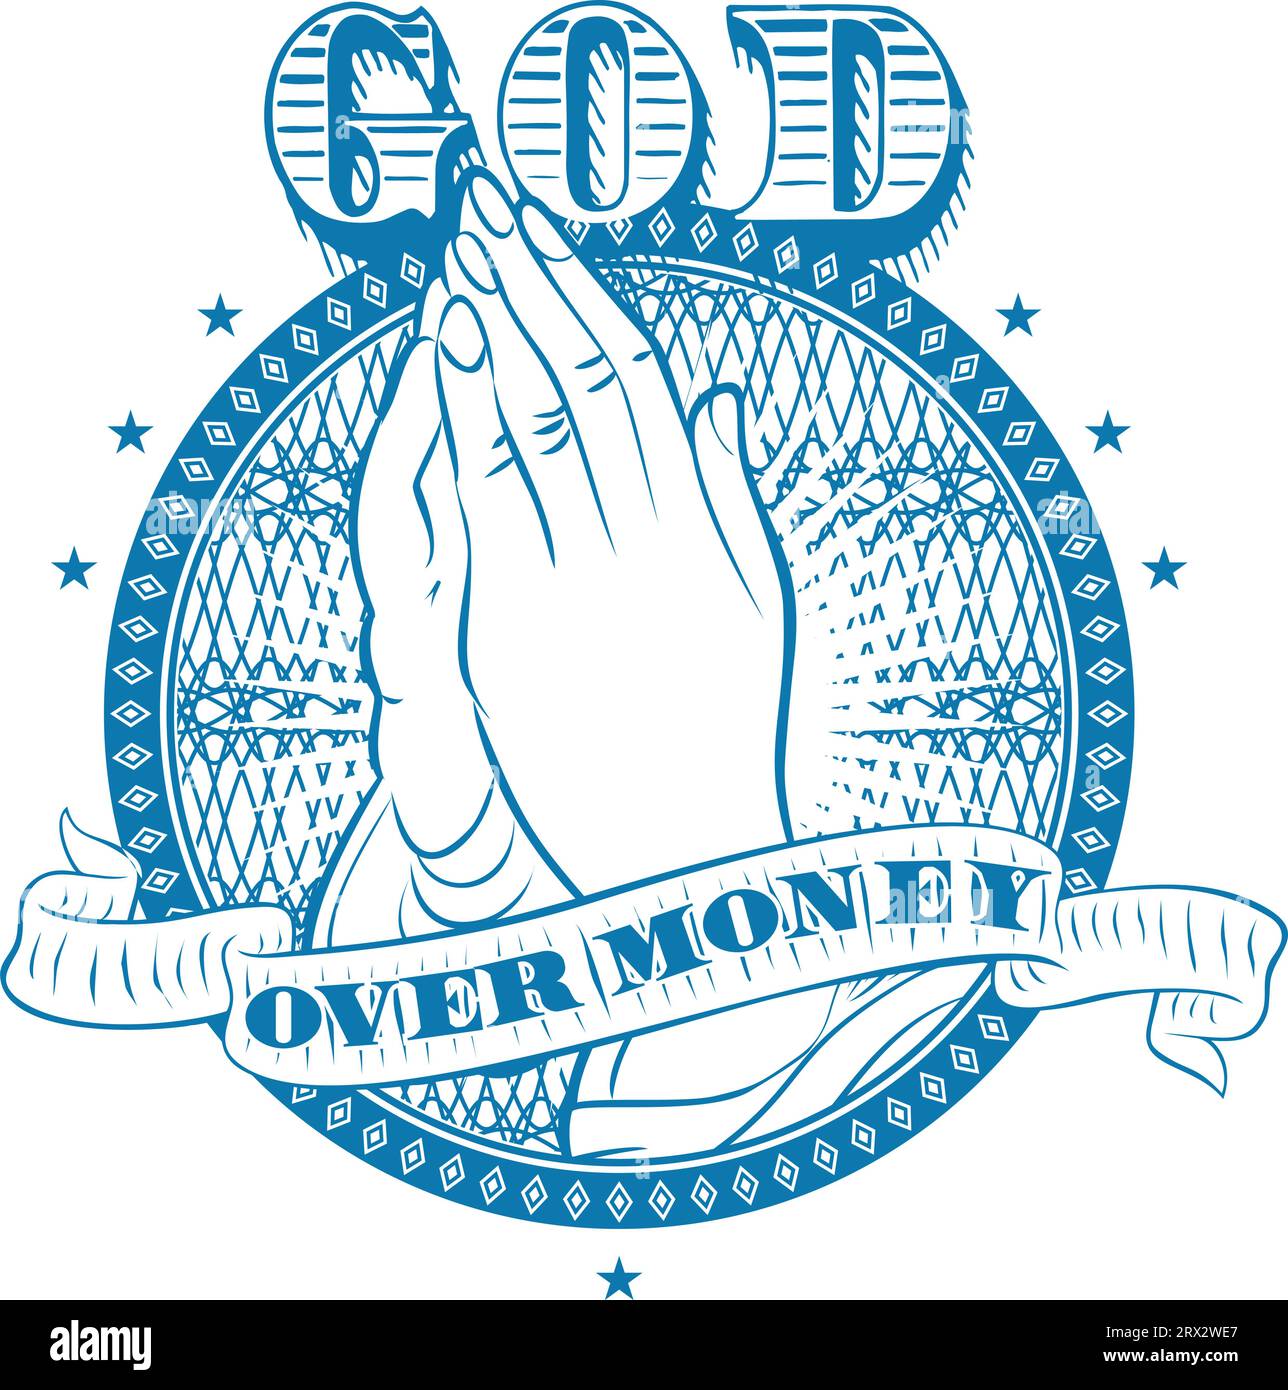 God Over Money with Engravings Style Illustration Stock Vector